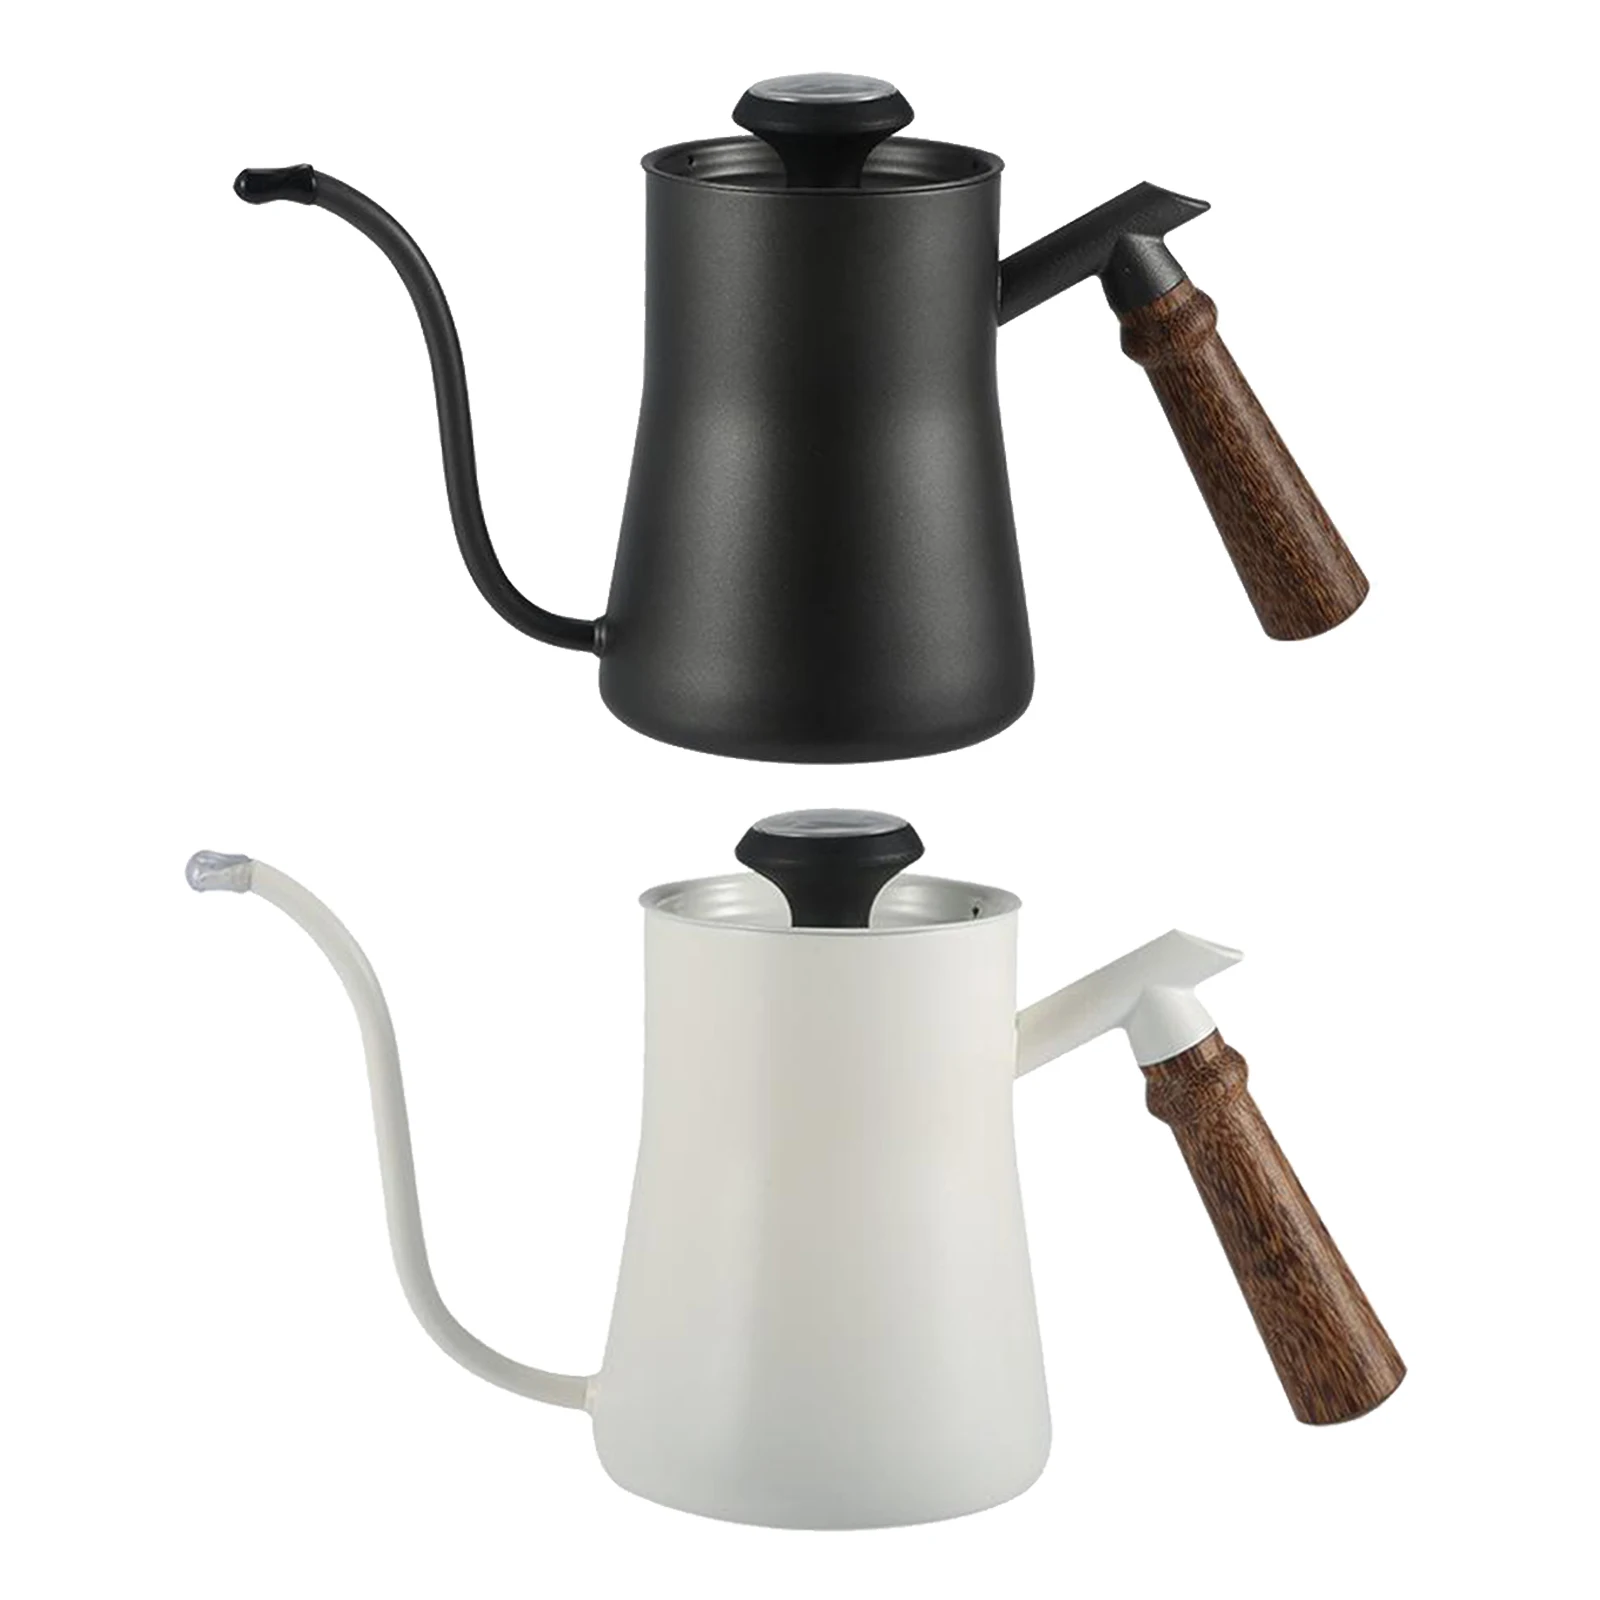 

650ml Gooseneck Kettle Stainless Steel Tea Spout with Thermometer Control the Temperature, for Barista Home, Coffee Drip Pot